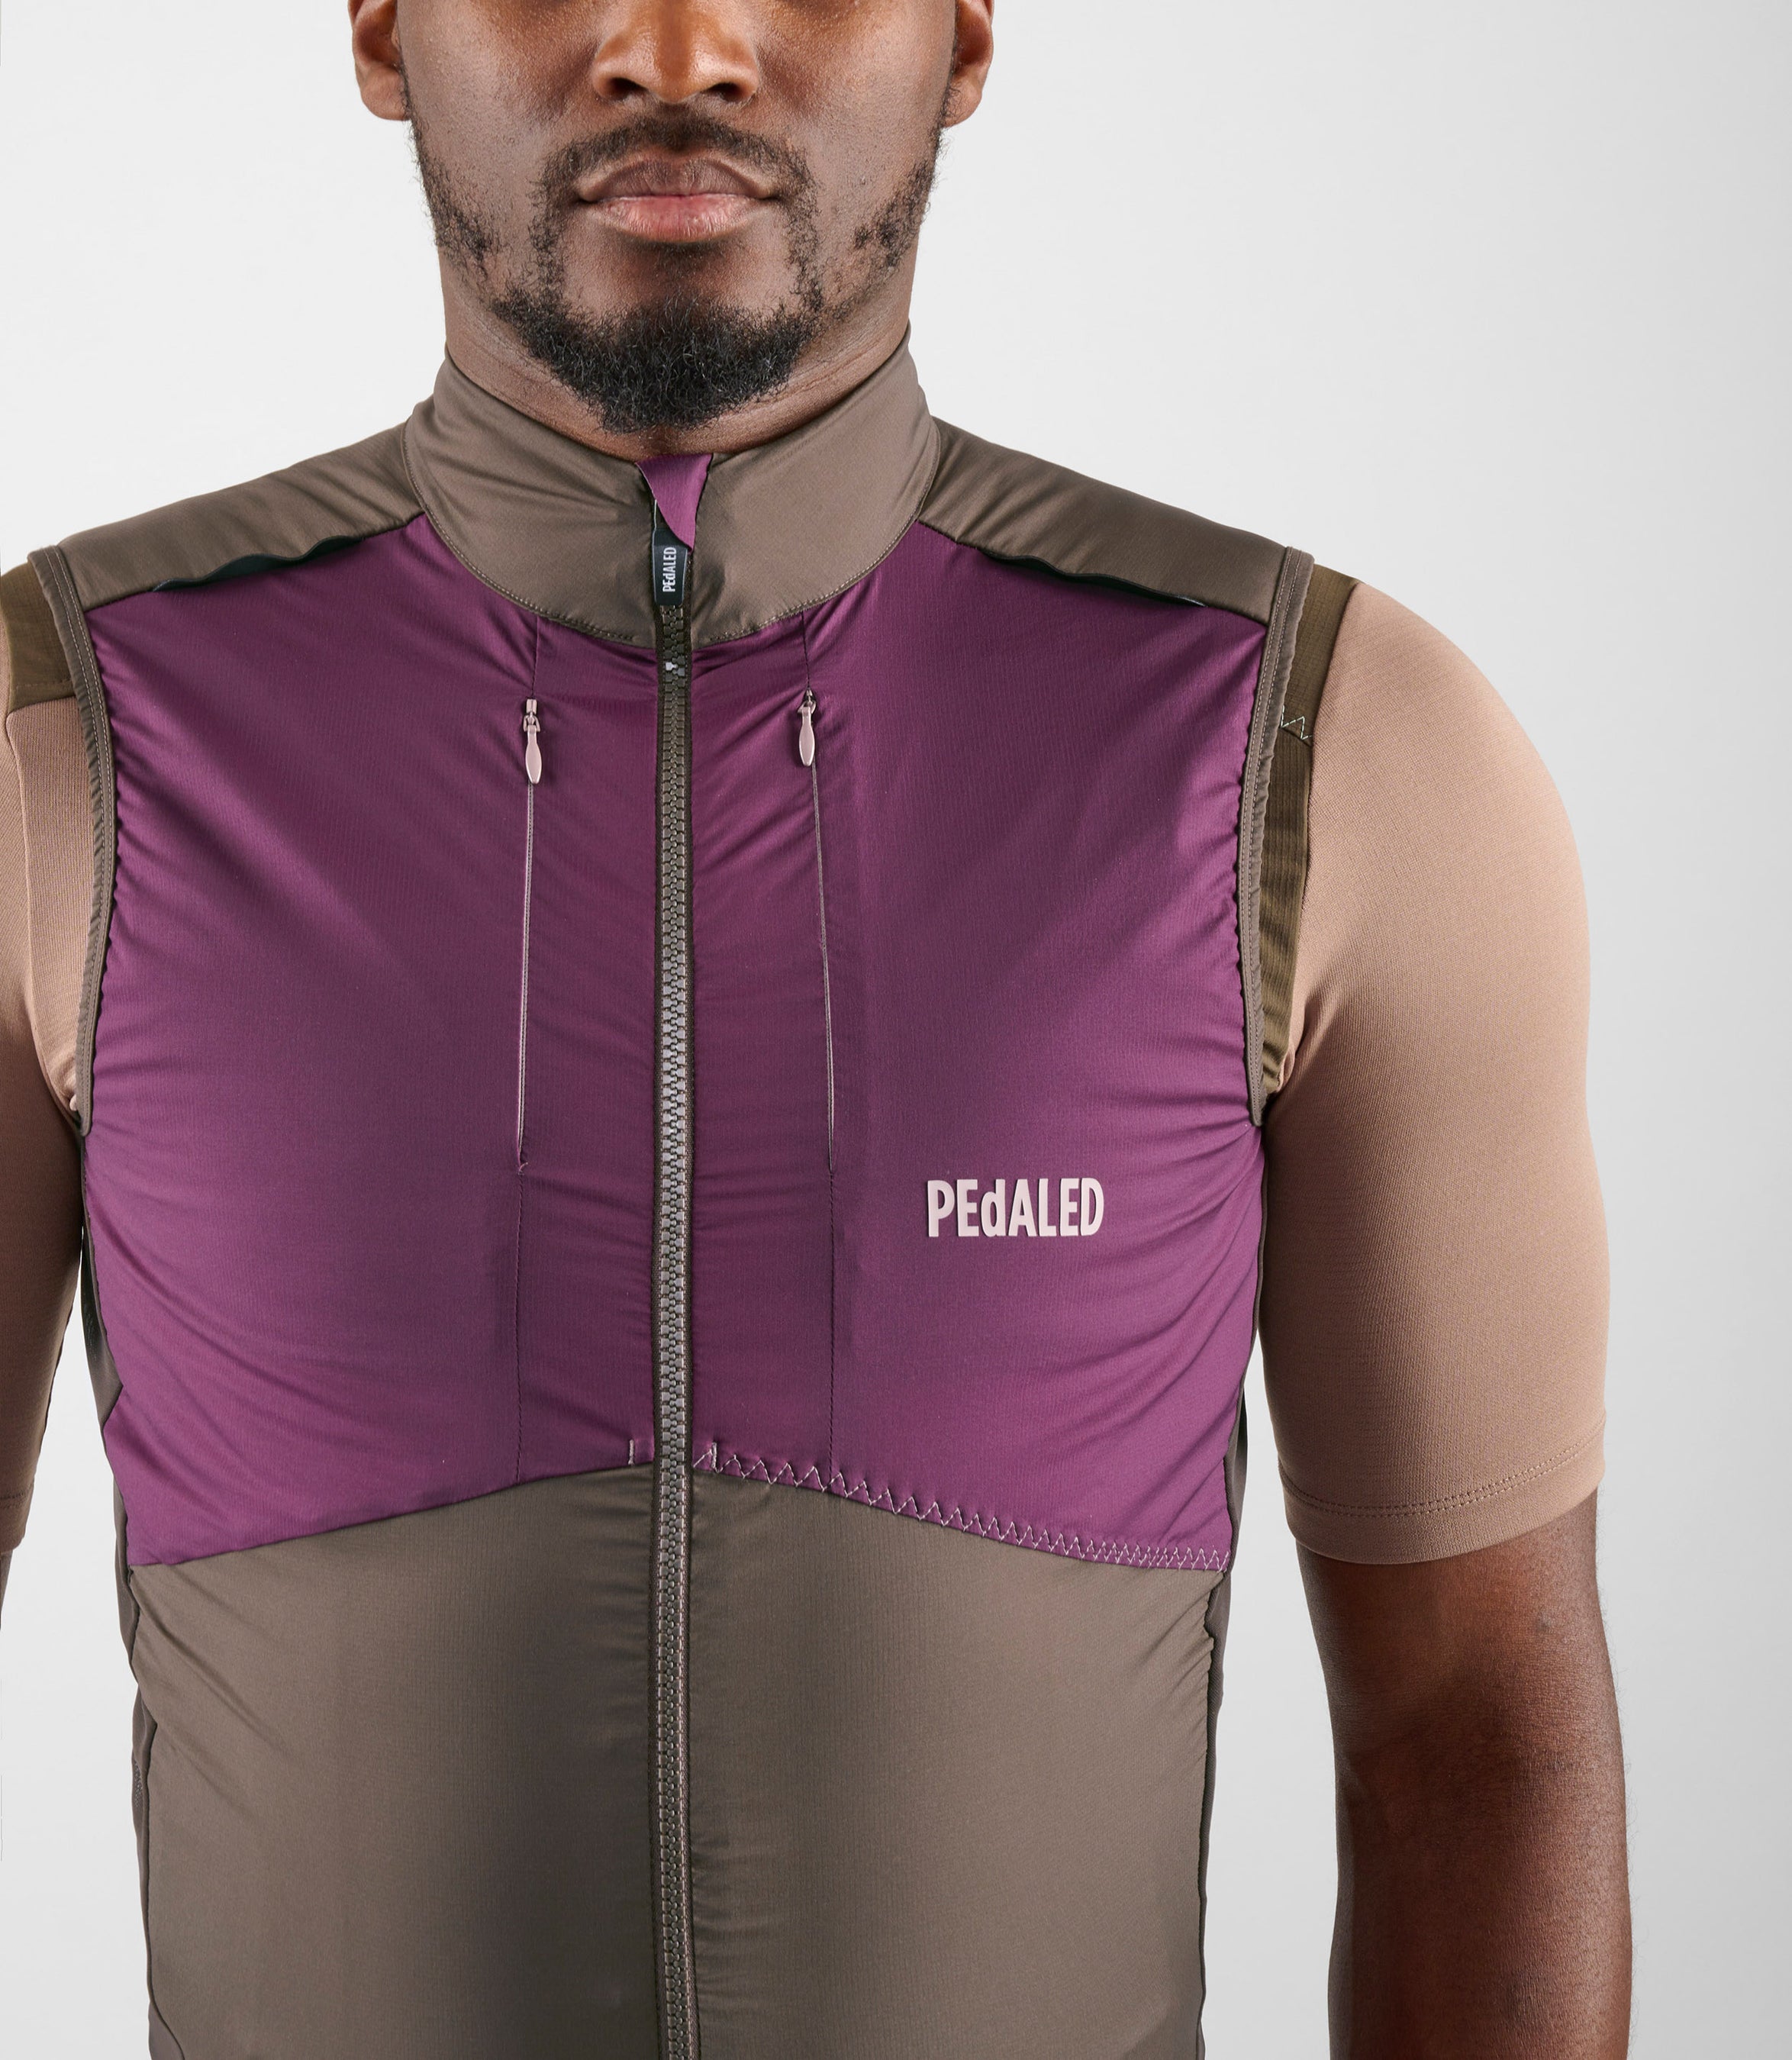 24SVEOD10PE_6_men cycling insulated vest purple odyssey front pedaled